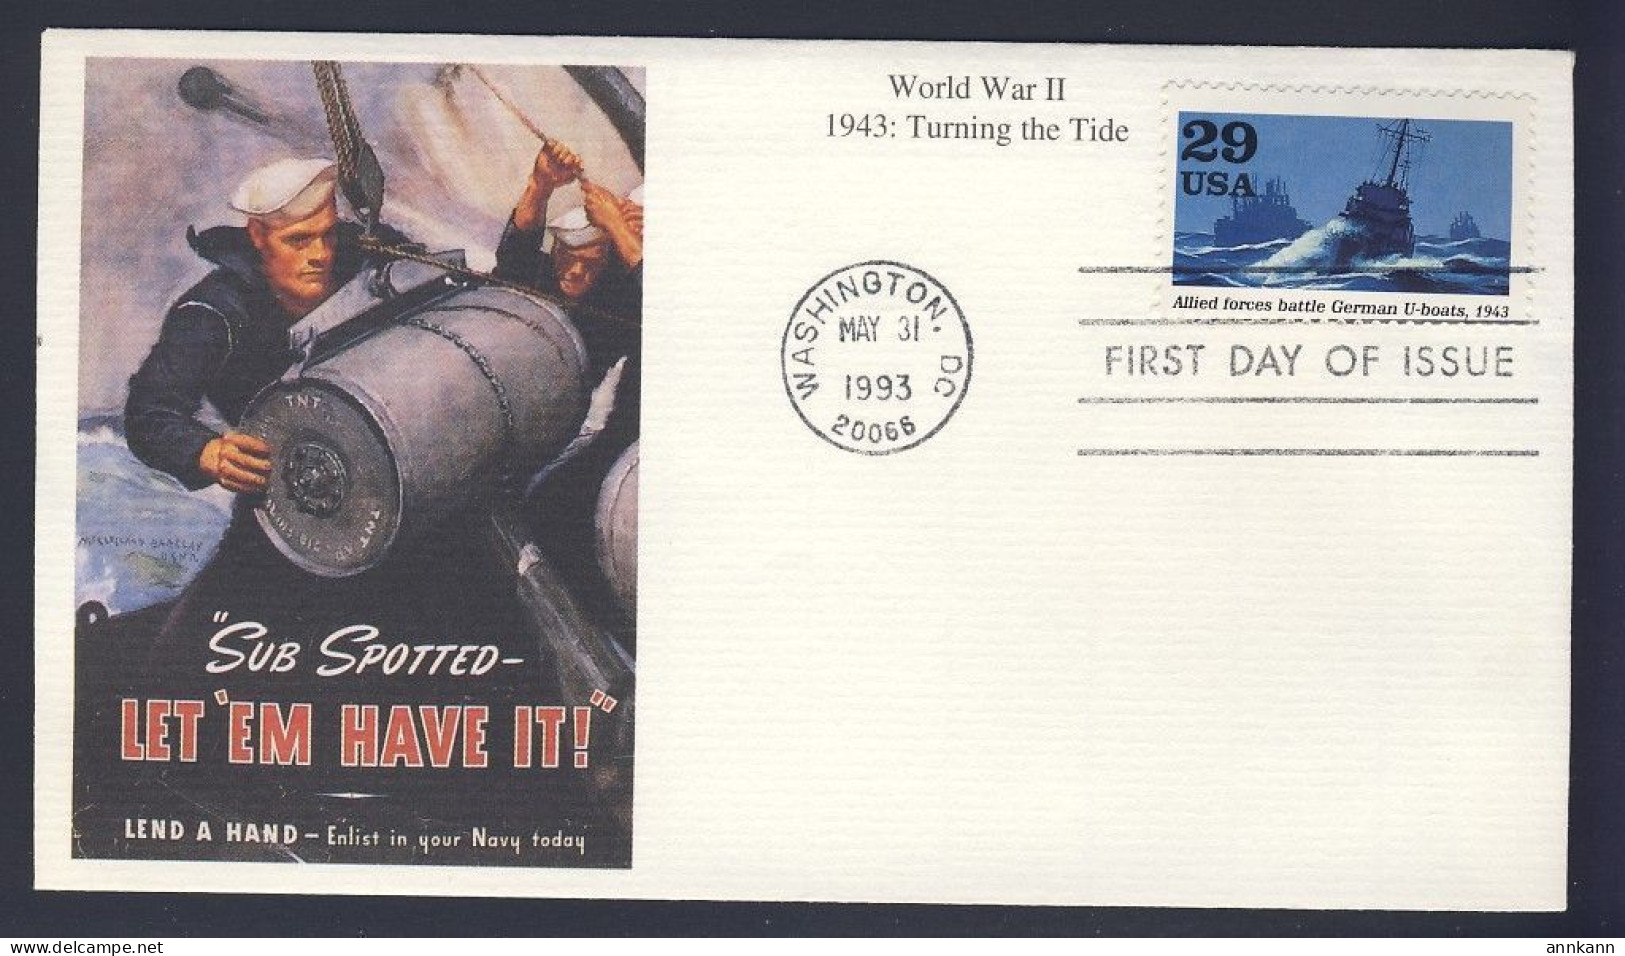 USA POSTAL HISTORY - 1993 - WWII 1943 Turning The Tide - FDC Cover - NAVY - 1991-2000